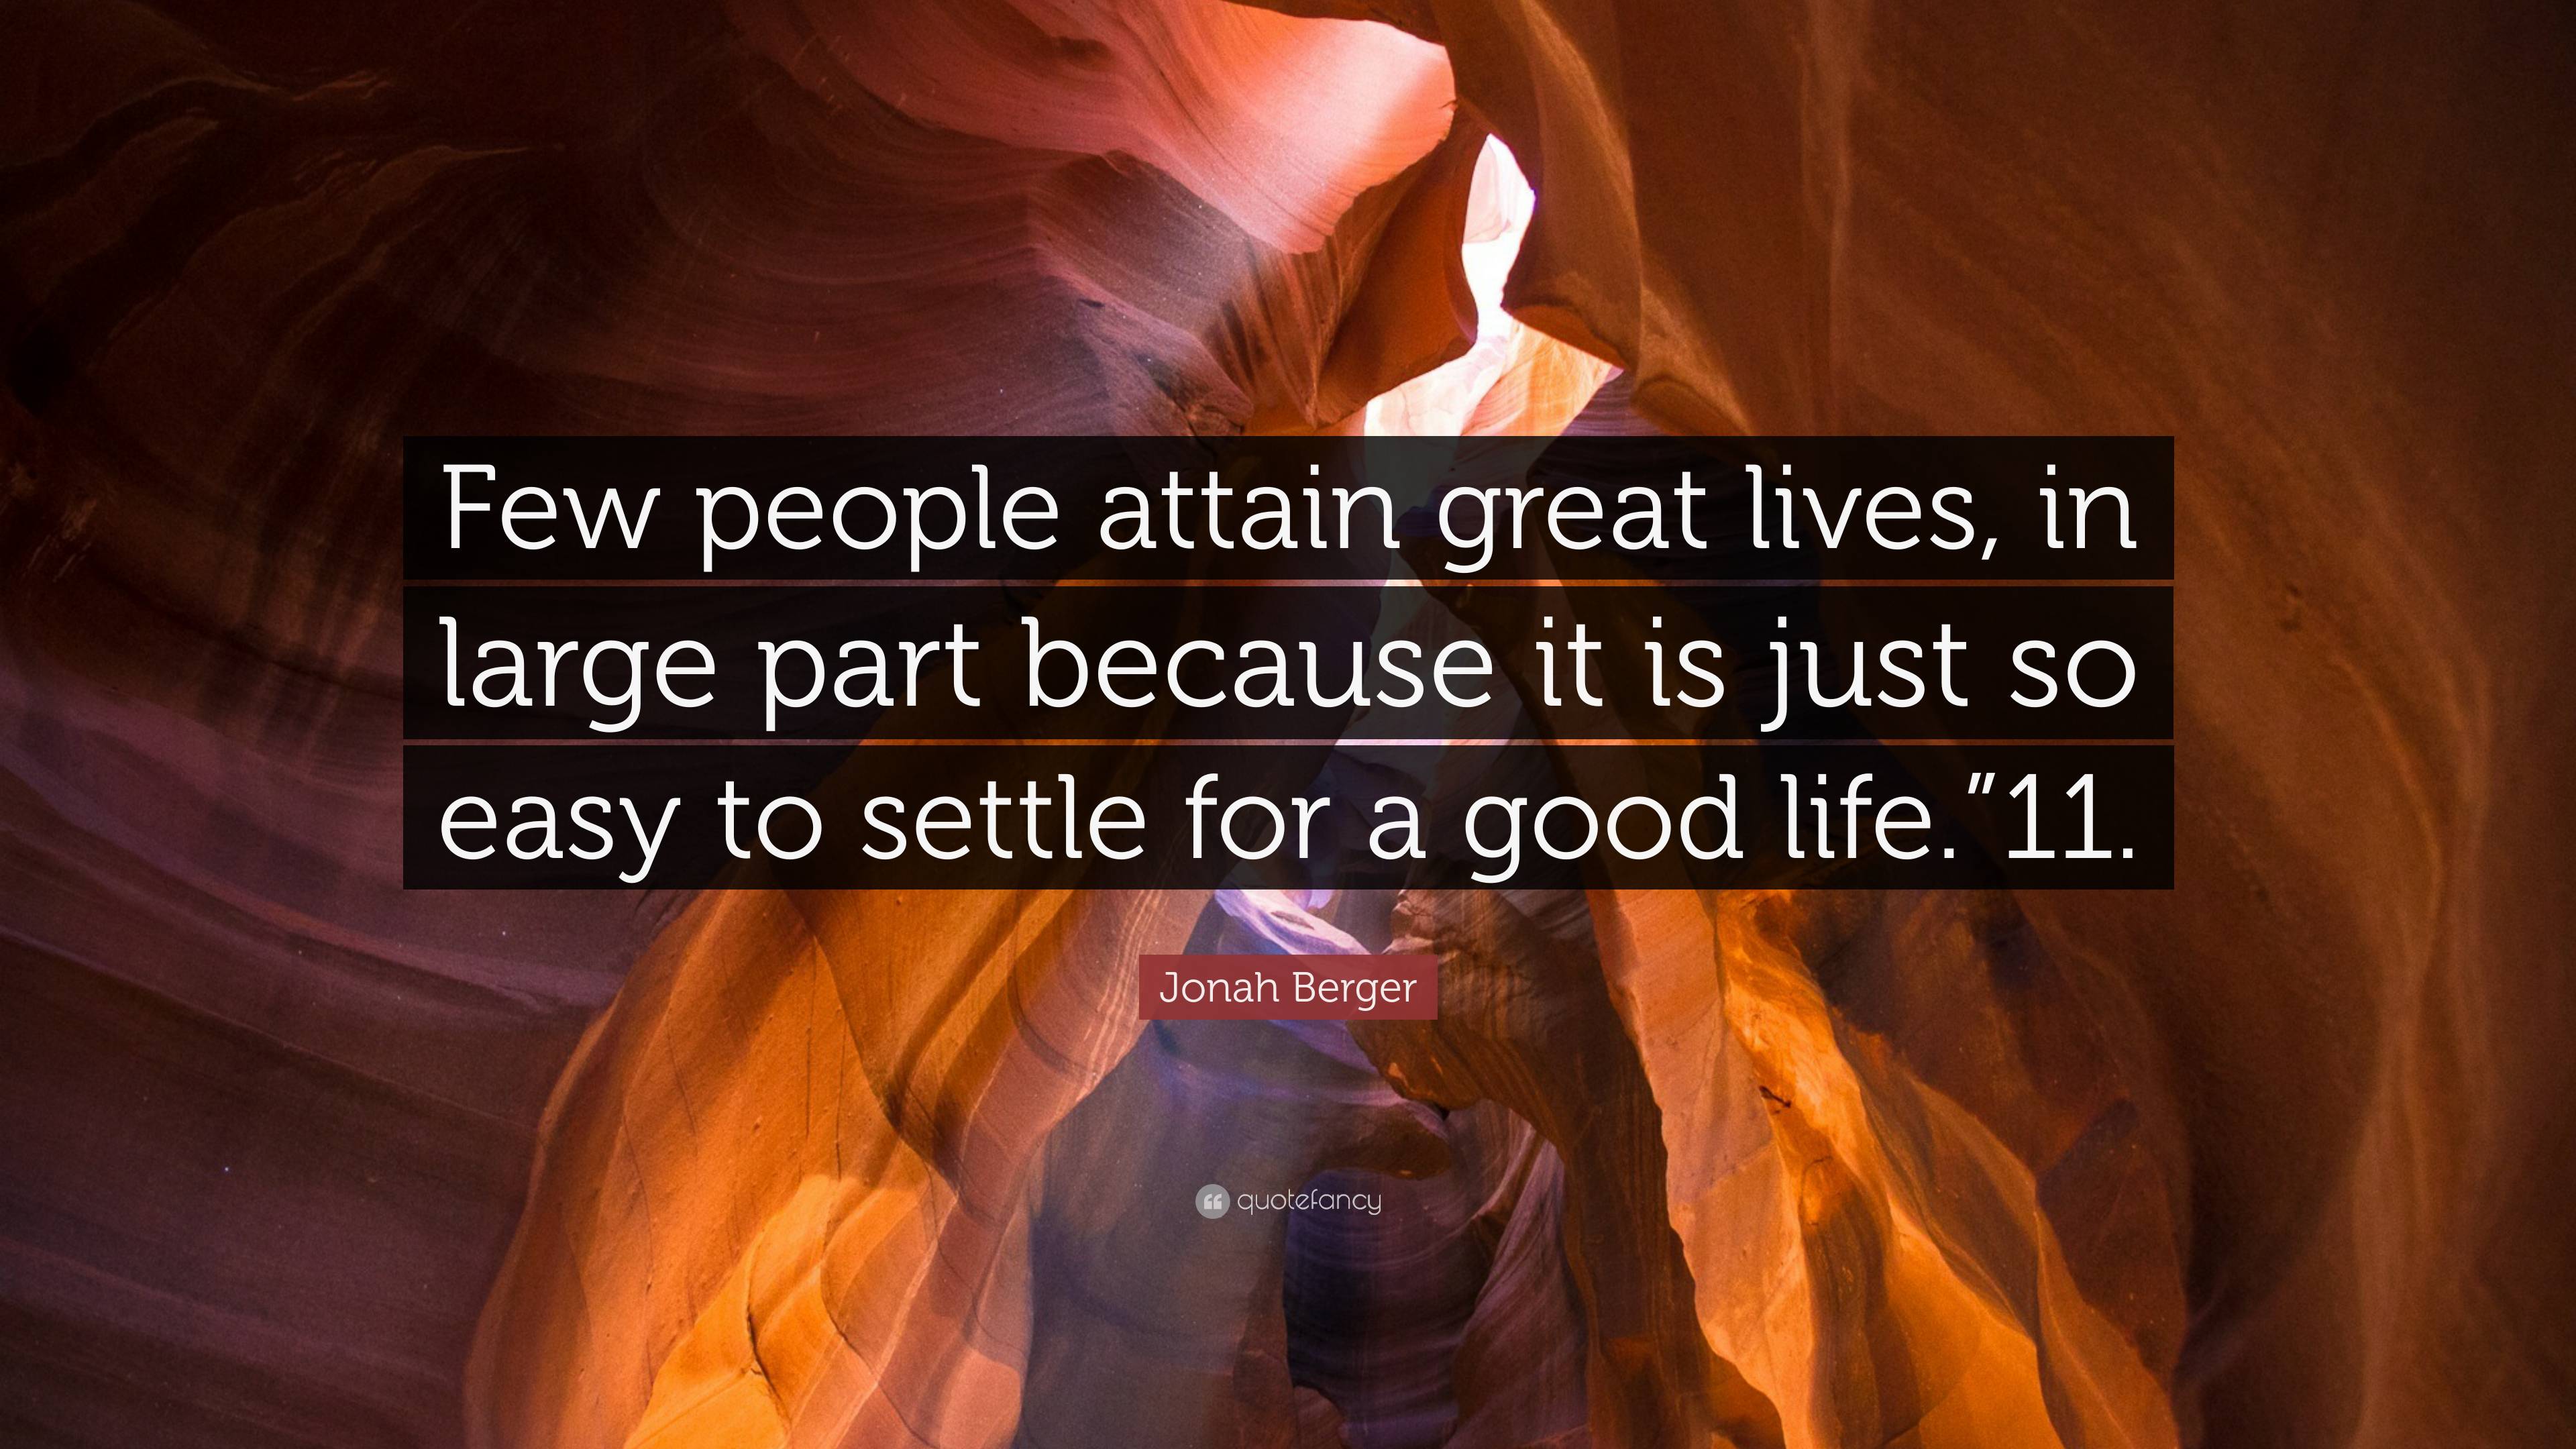 What Is The Good Life & How To Attain It